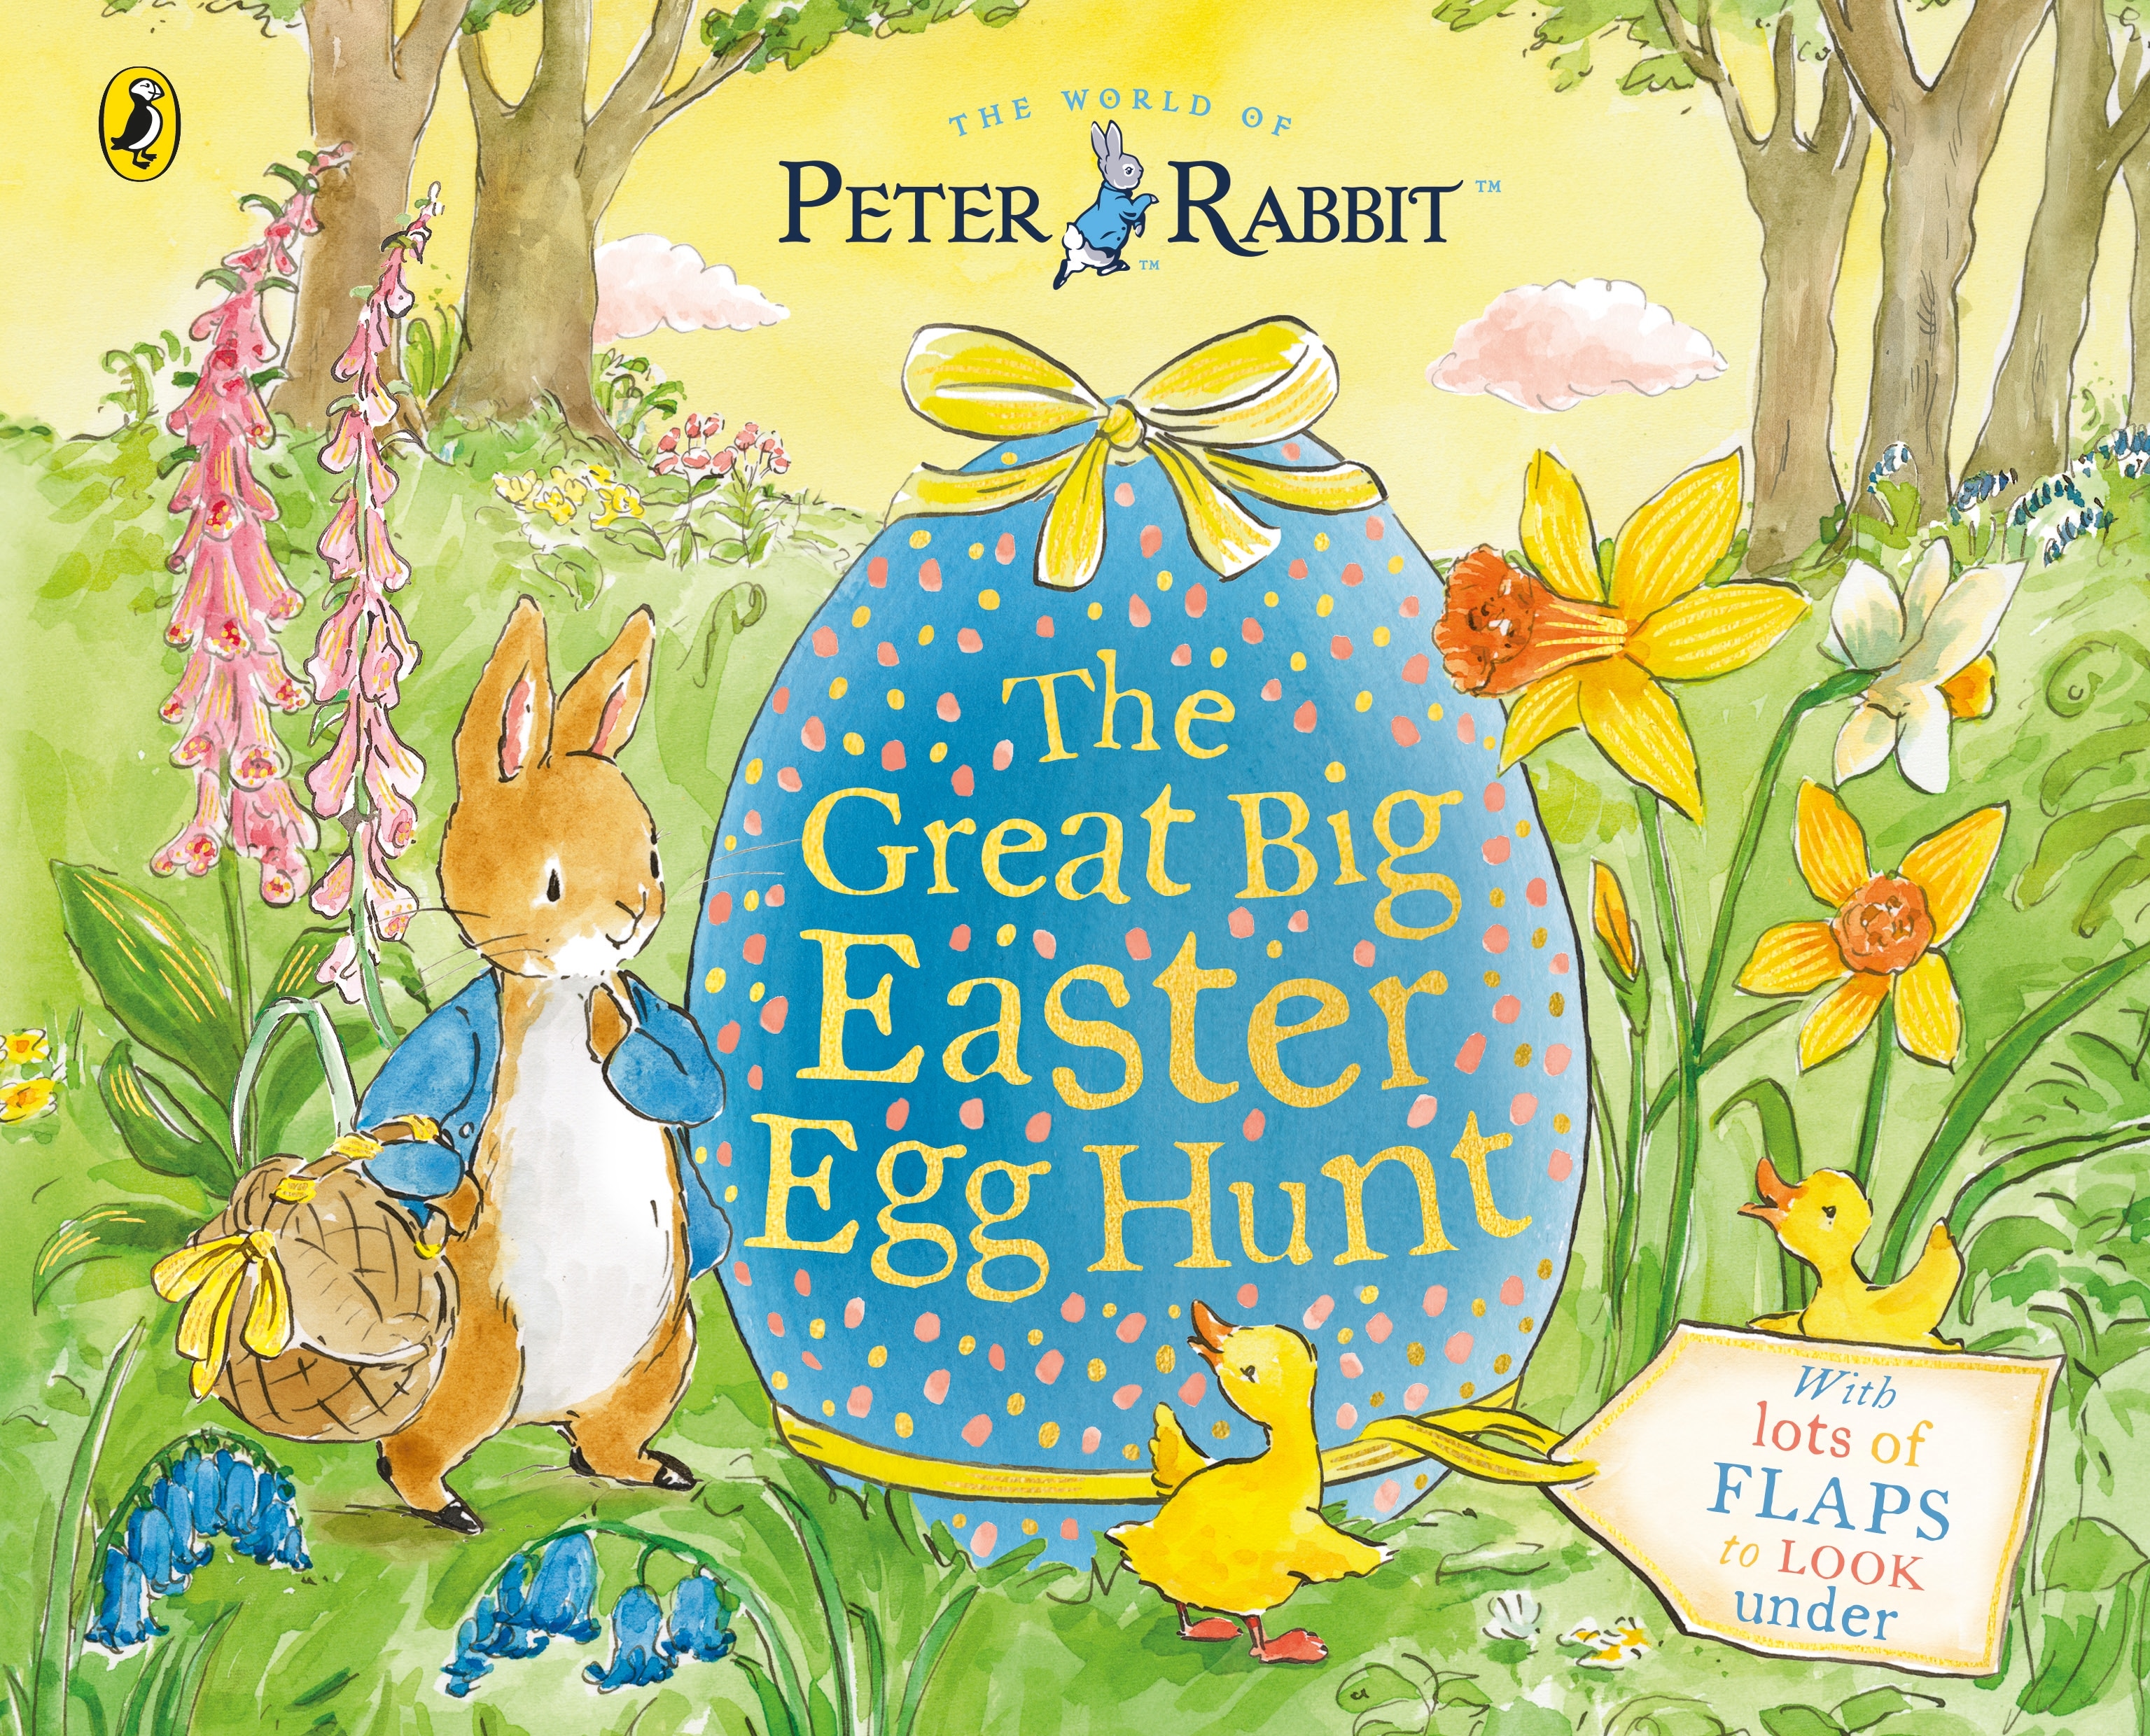 Book “Peter Rabbit Great Big Easter Egg Hunt” by Beatrix Potter — March 3, 2022